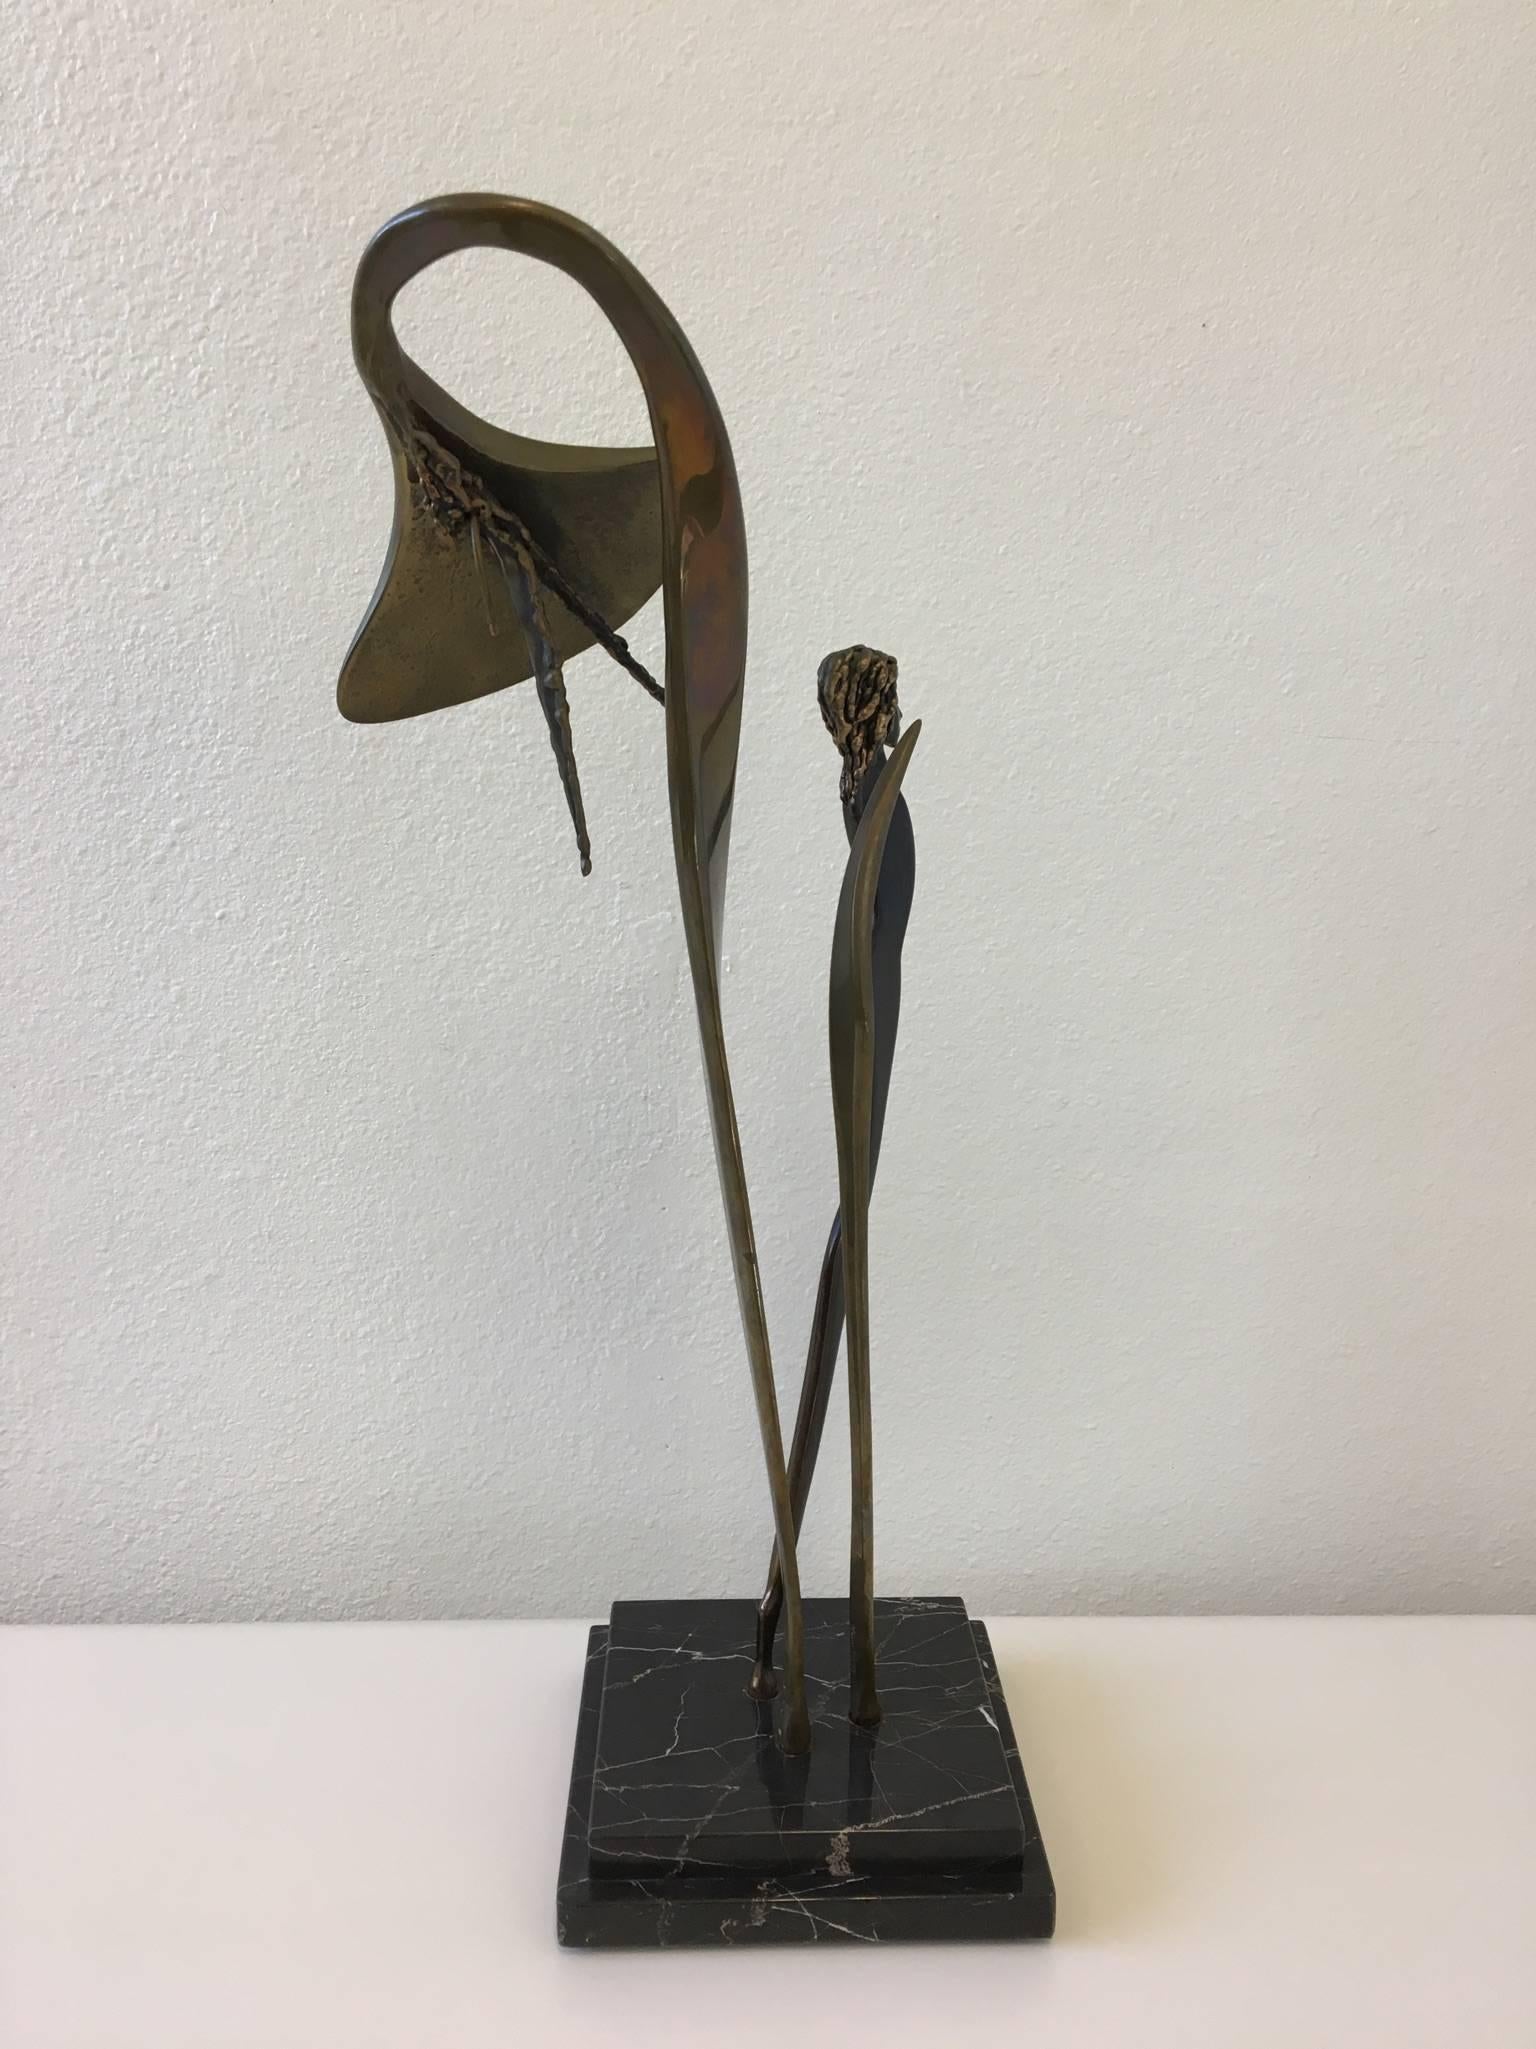 A beautiful cast bronze and black marble sculpture of flower with woman by McLean from 1986.
The sculpture is signed McLean and dated 1986. 
Dim: 25.5 inches high, 10 inches wide and 8 inches deep.